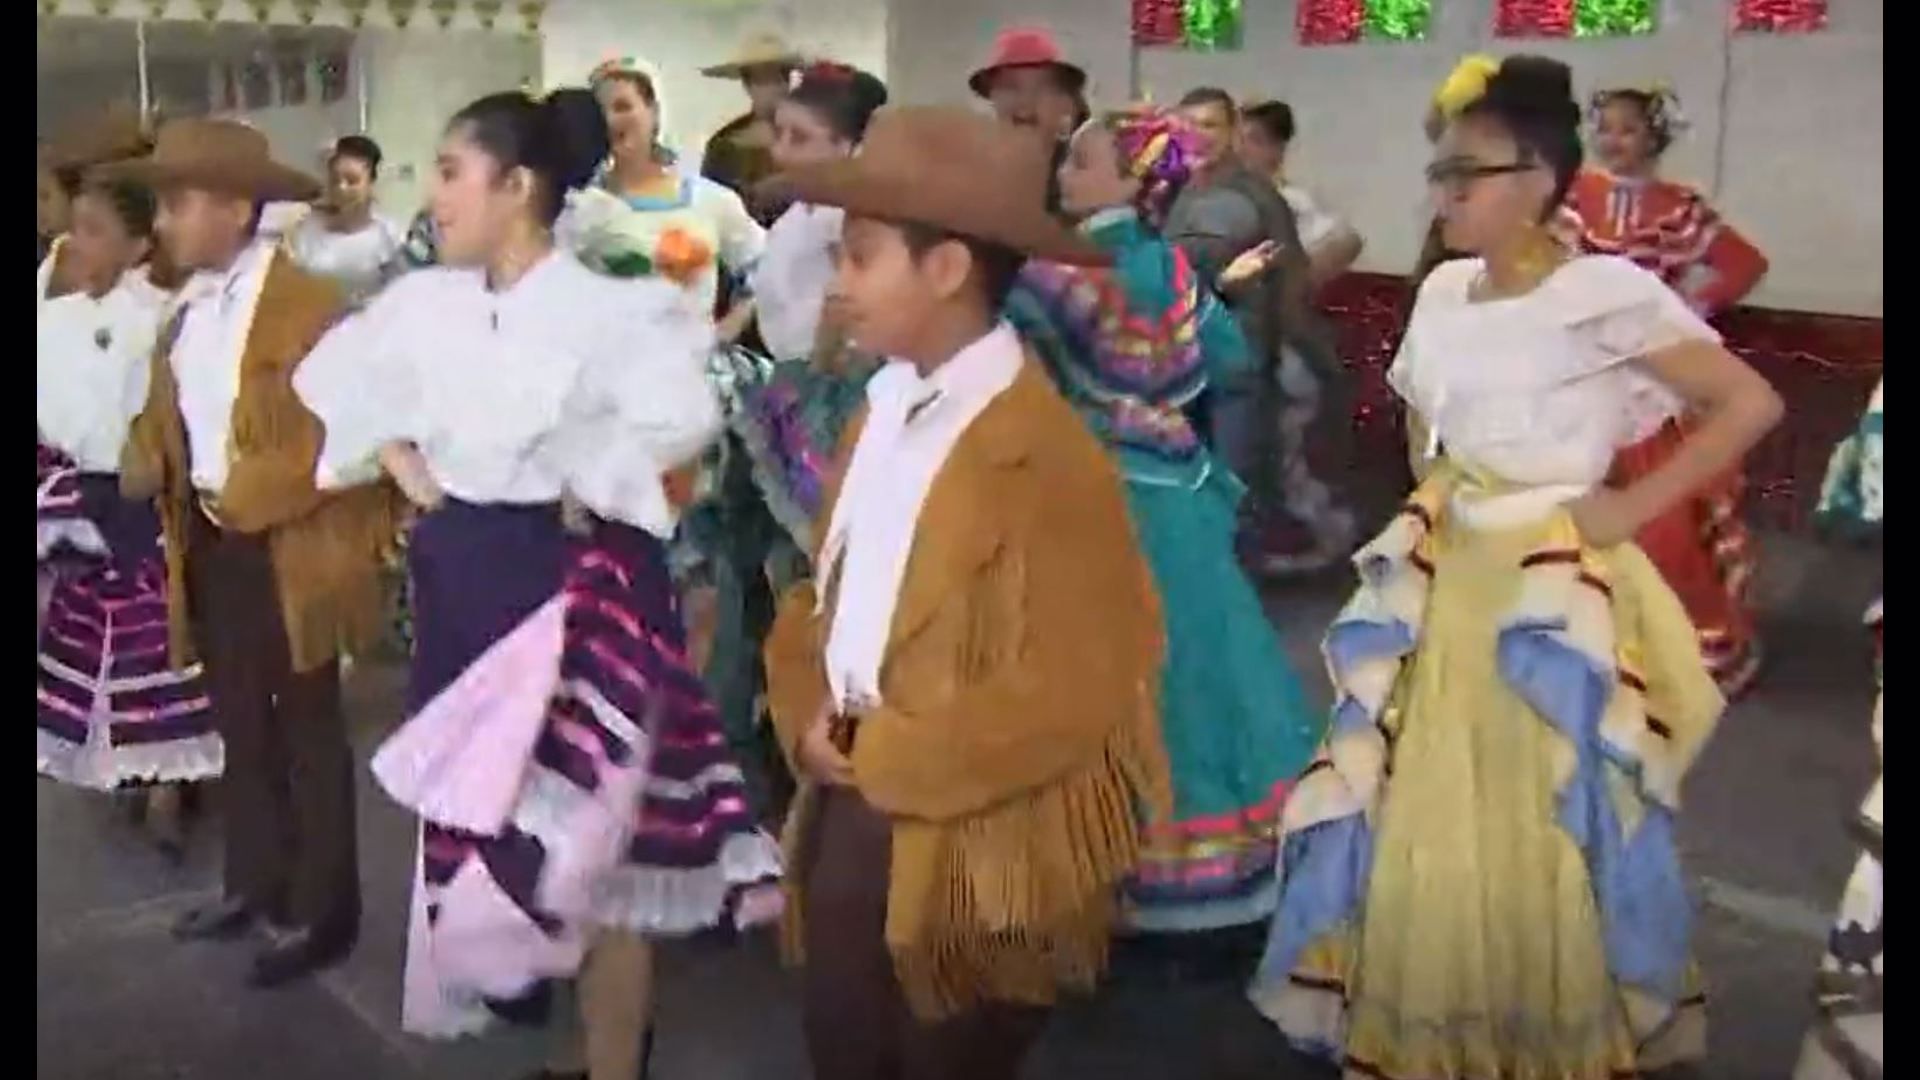 Ruben Galvan takes you inside a dance school dedicated to the art of folklorico, flamenco and much more on #HTownRush.